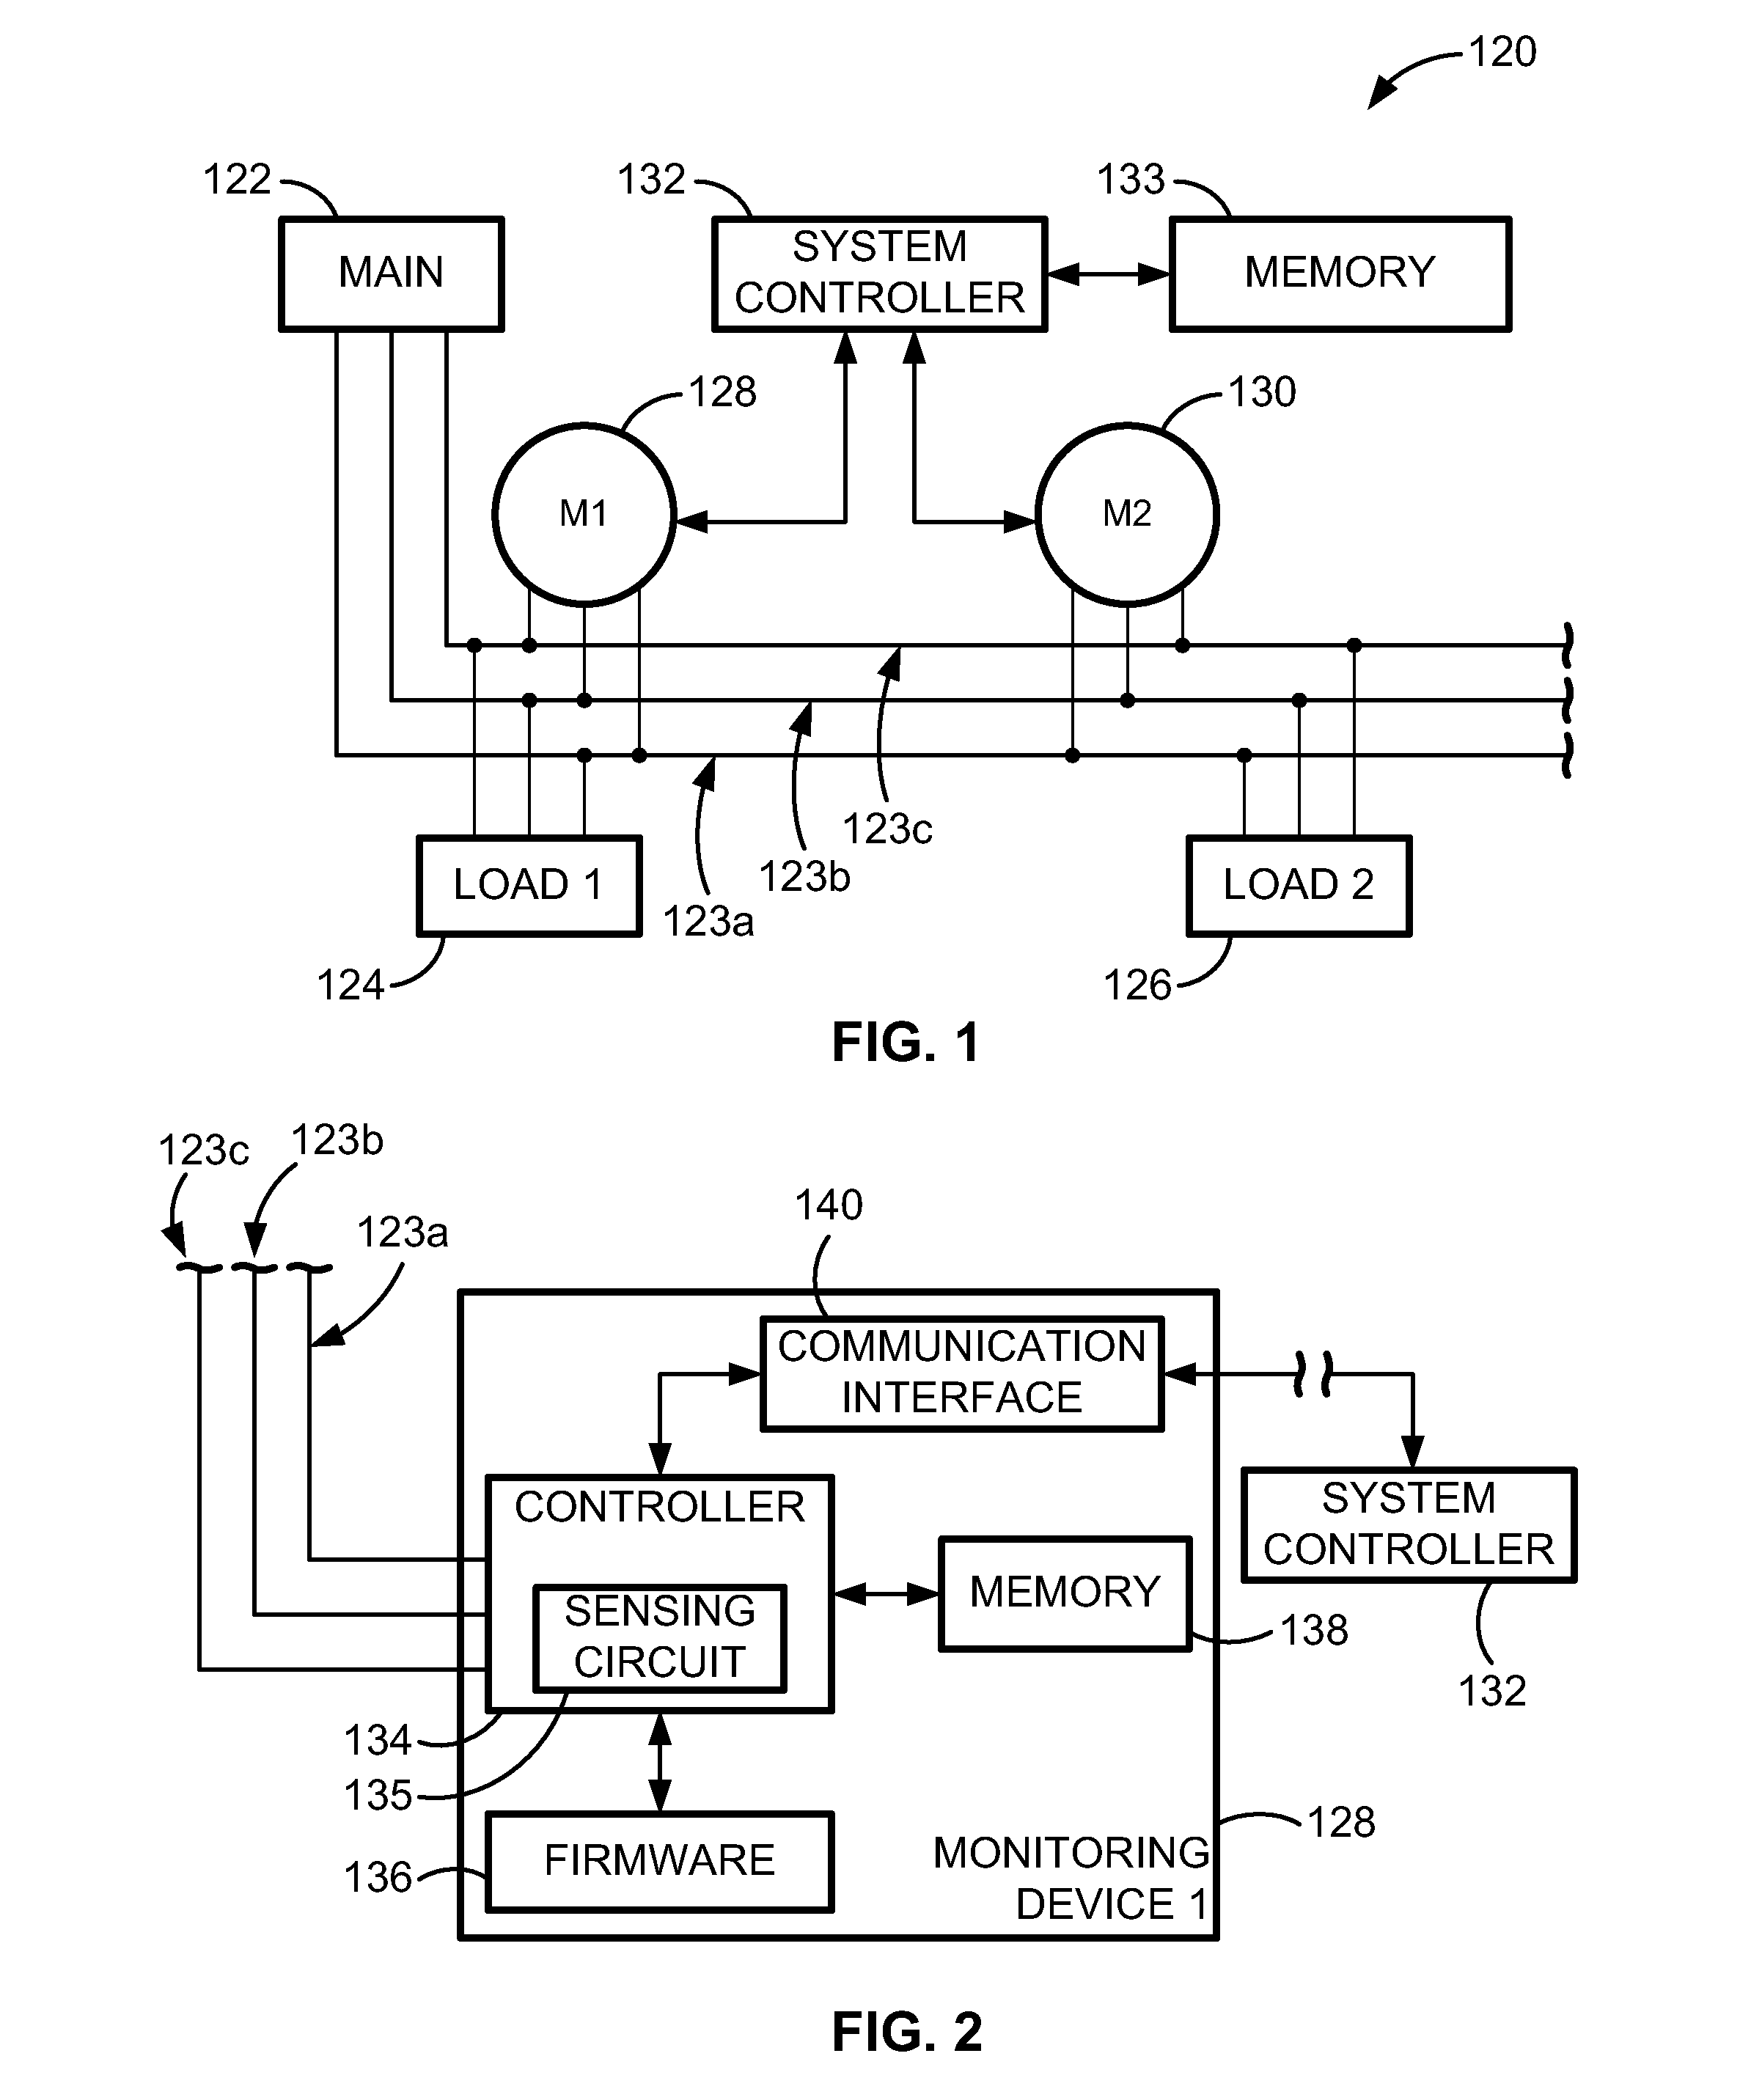 Data alignment in large scale electrical system applications